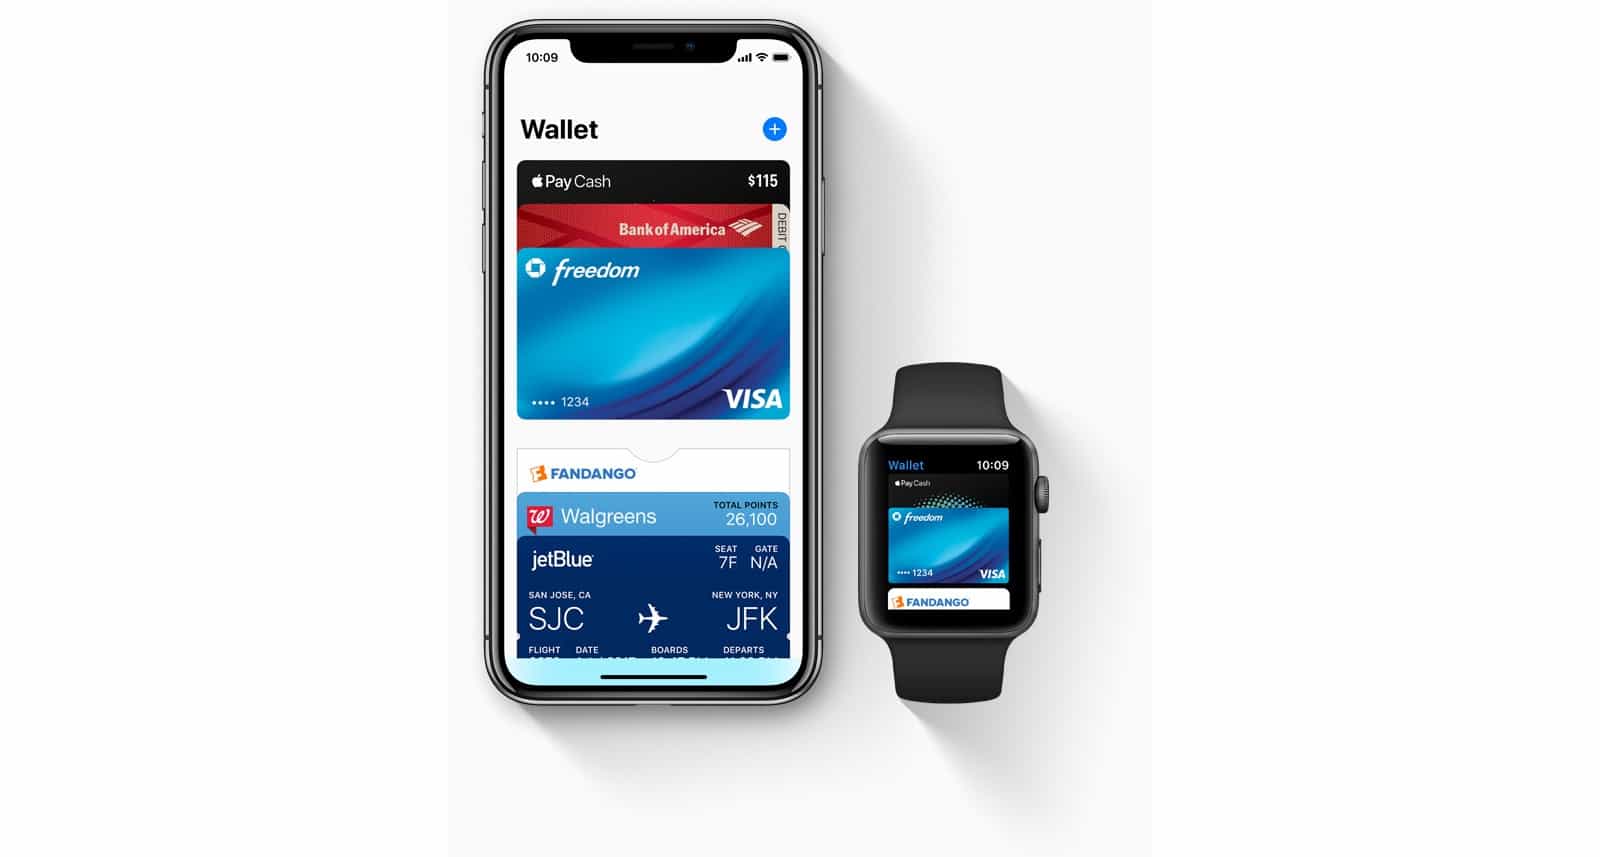 Here's how Apple Wallet looks on the new iPhone X.